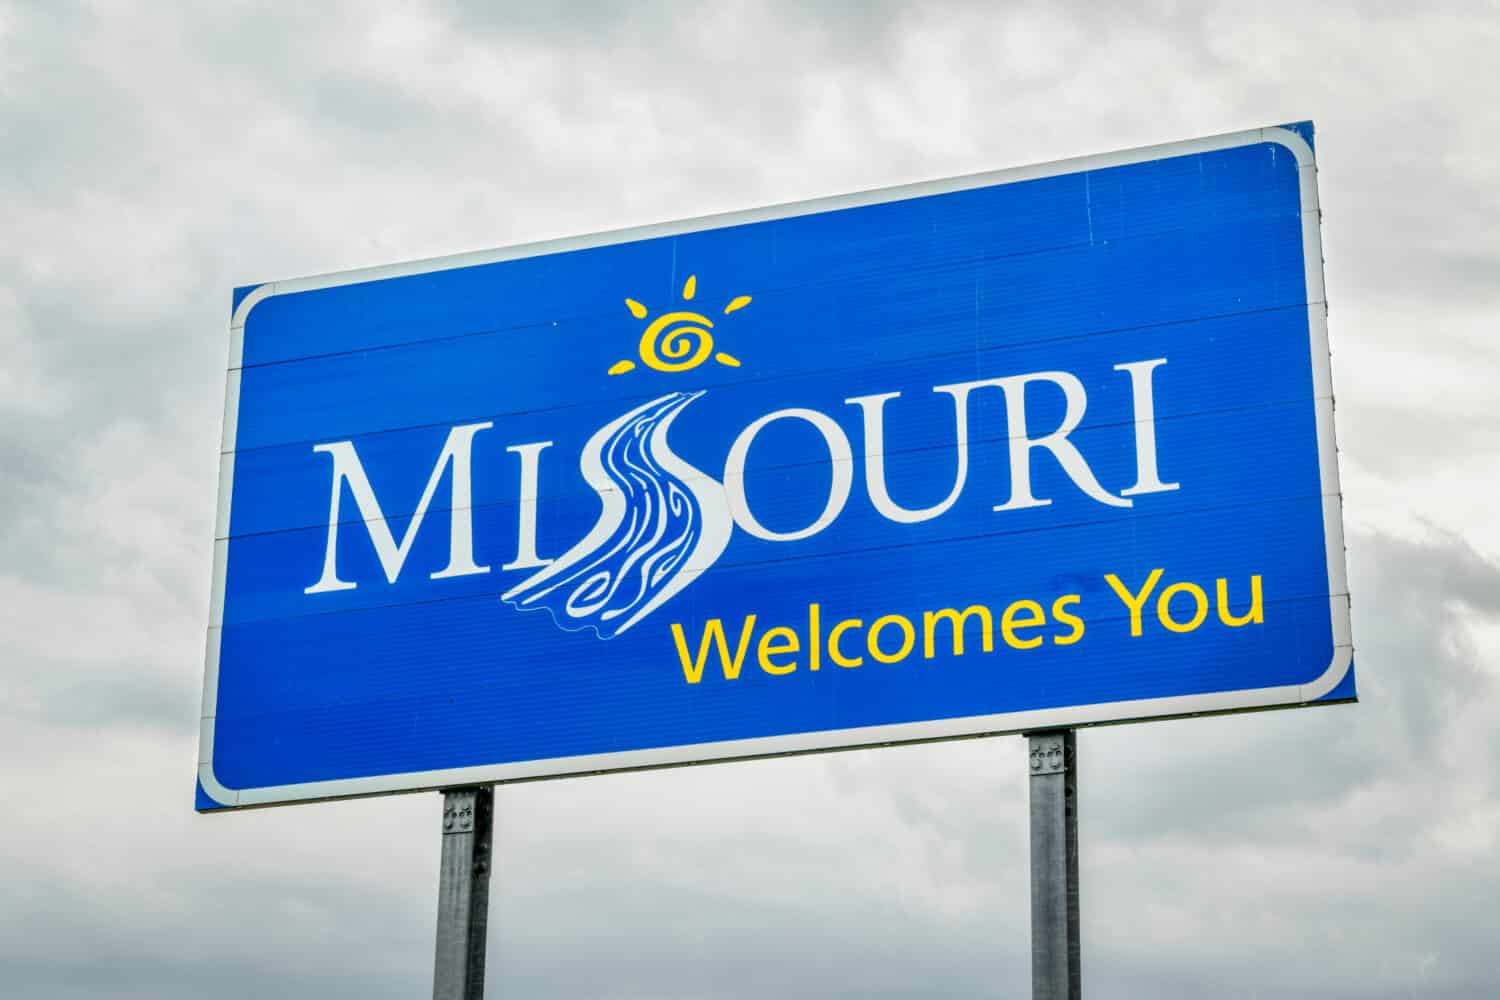 Missouri Welcomes You - a roadside sign at a state border with Illinois